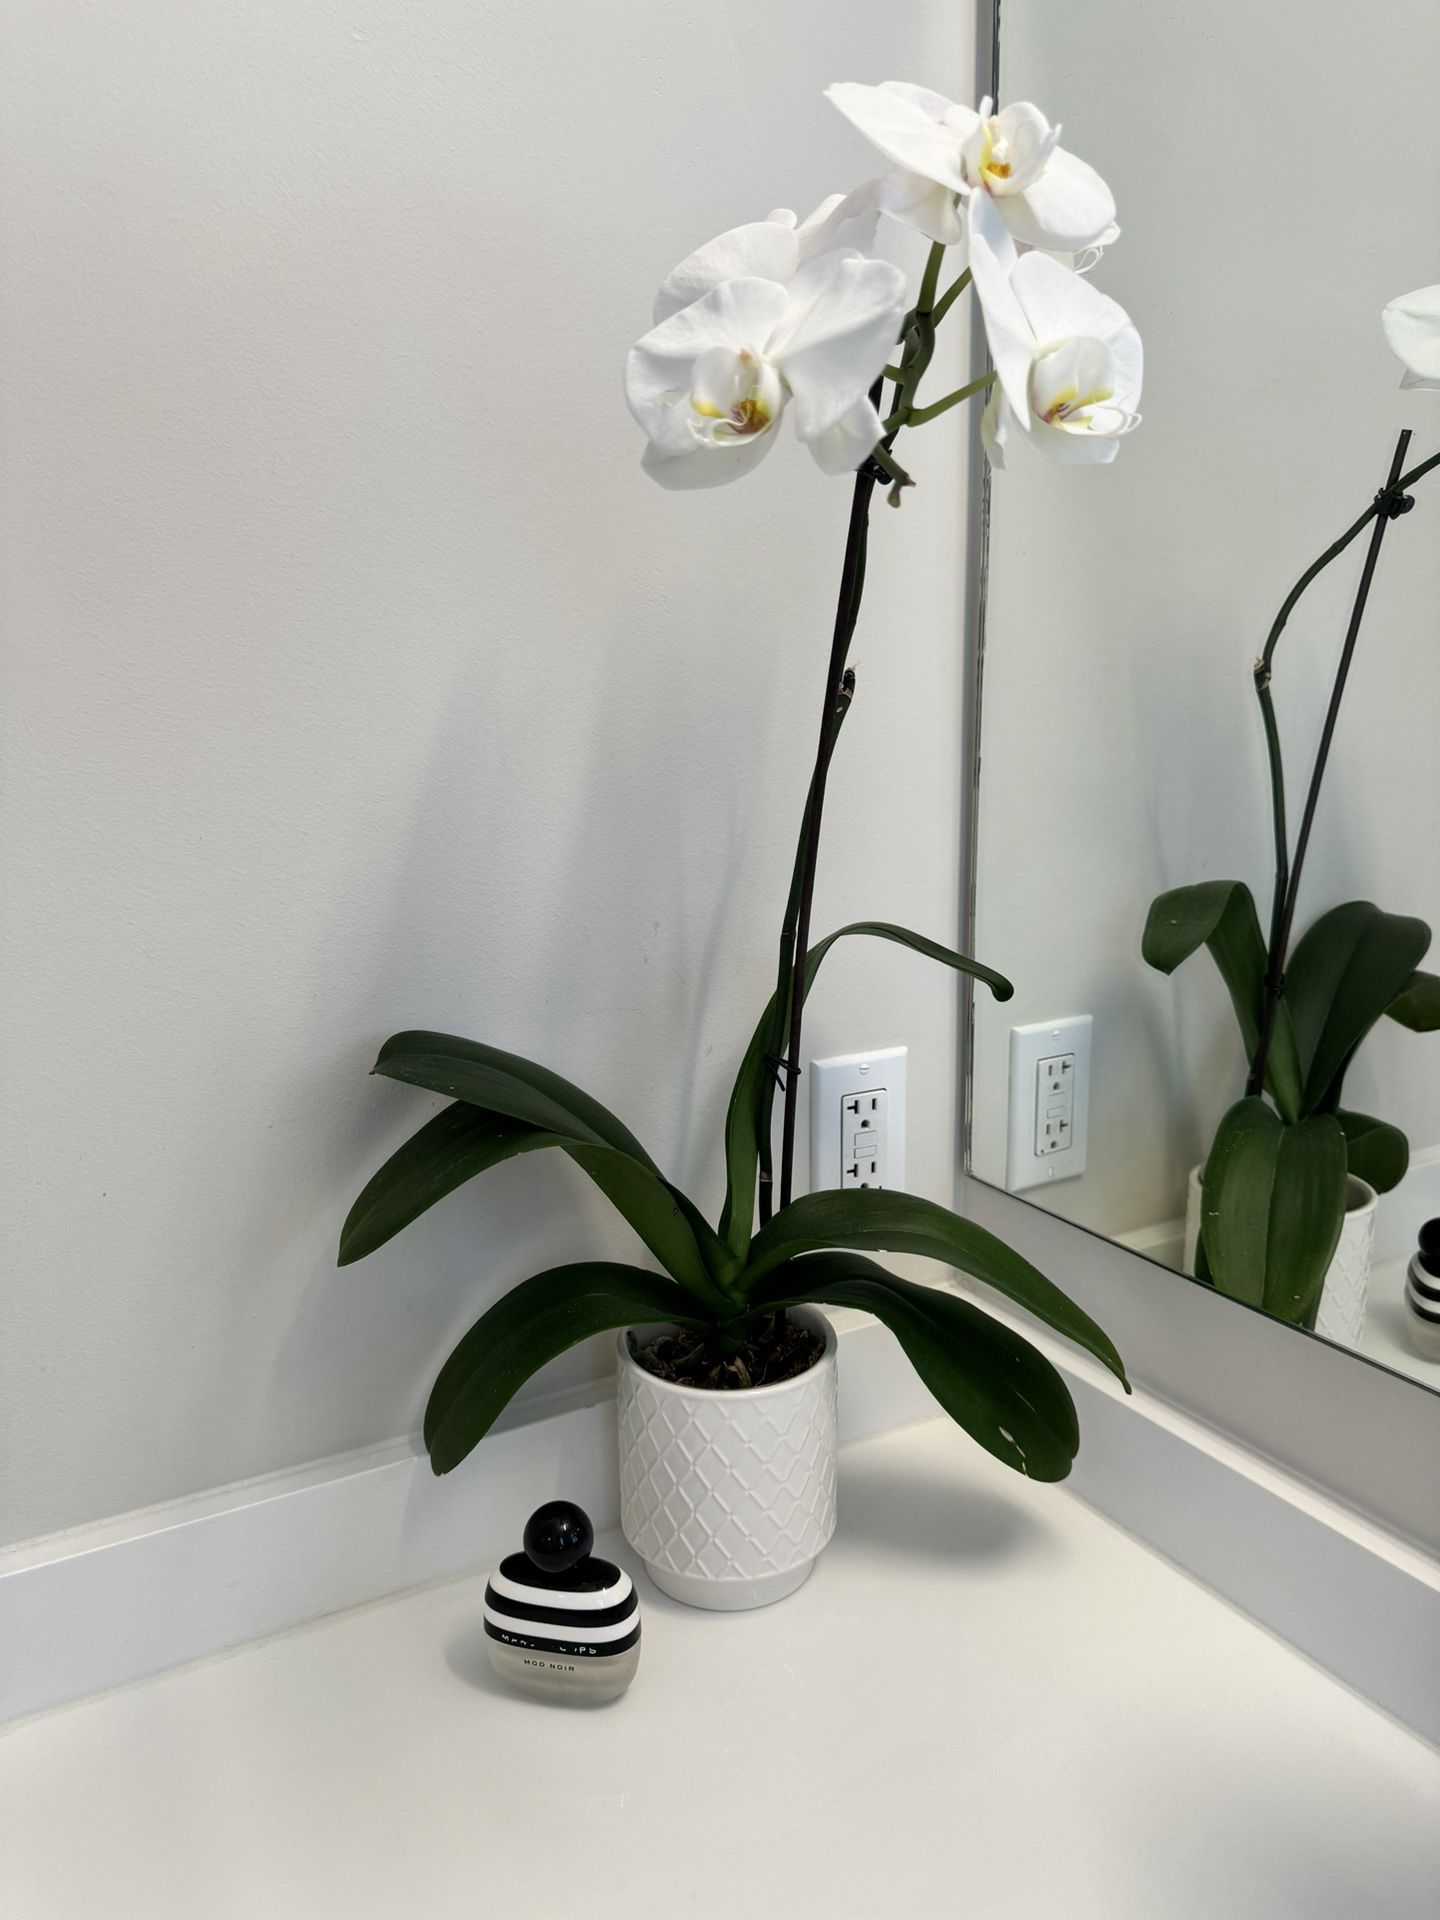 16” White Orchid Pot And Plant